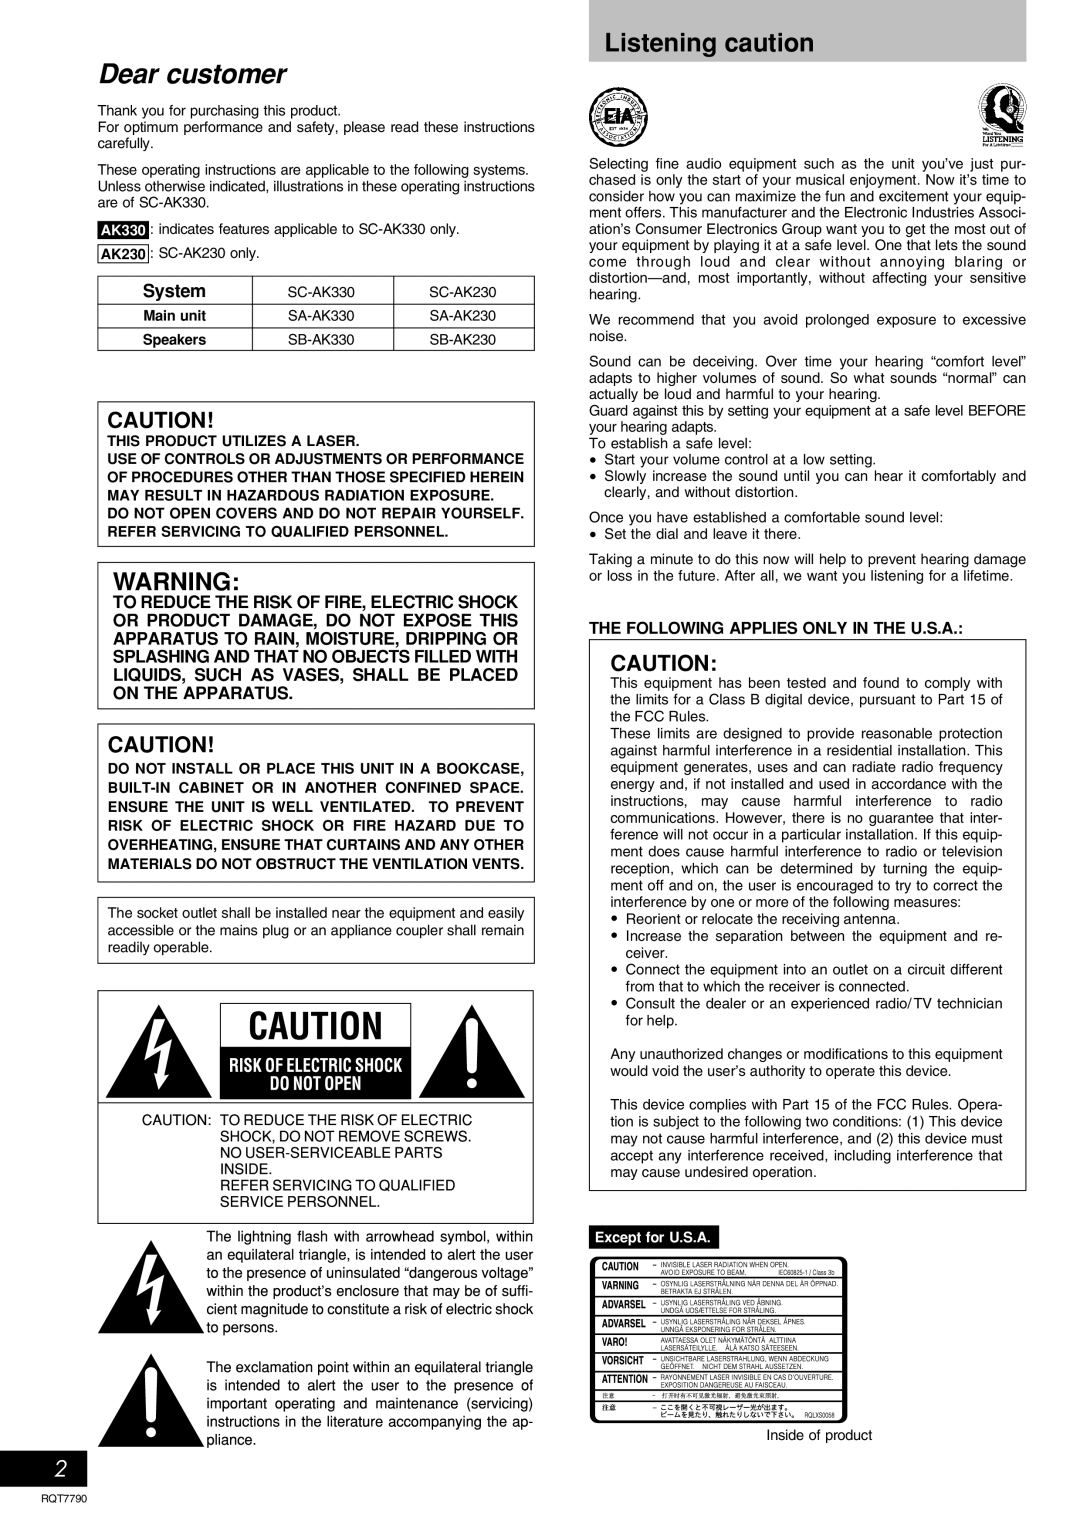 Panasonic SC-AK330 important safety instructions Listening caution, System, Except for U.S.A 